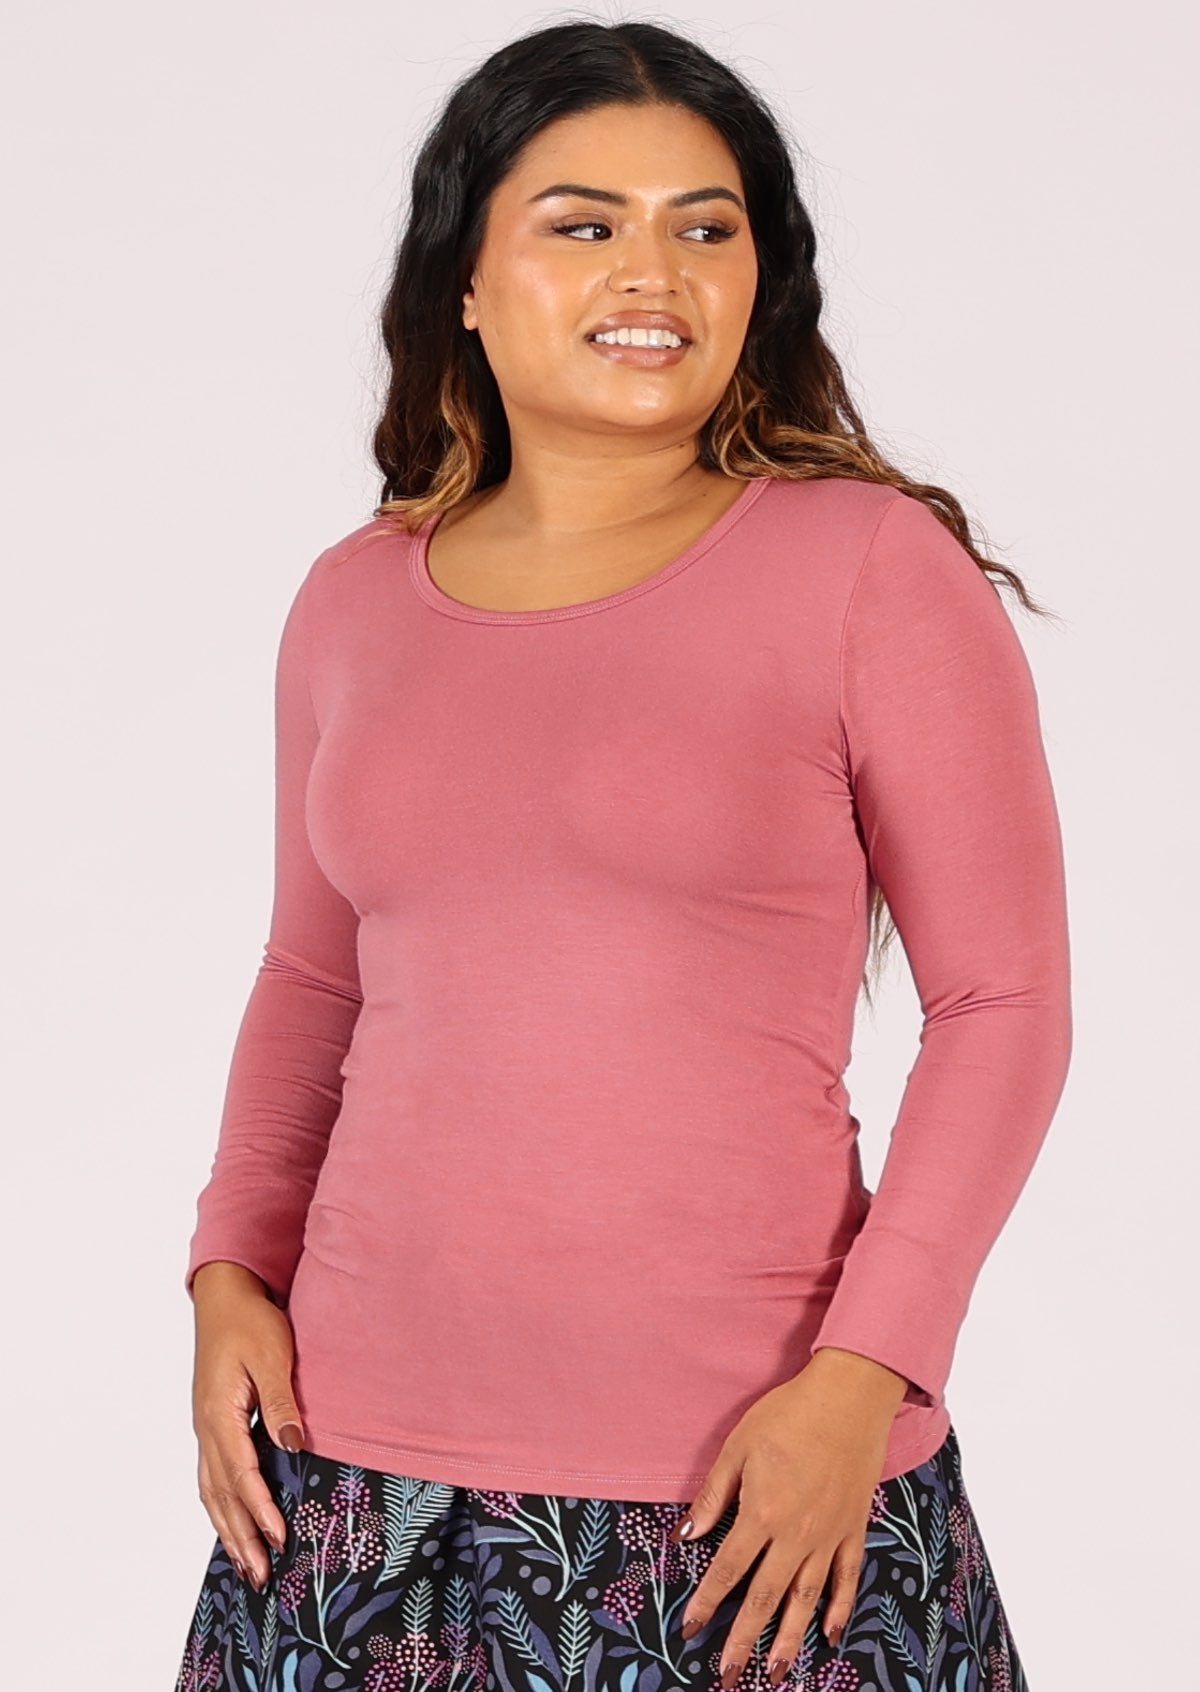 Soft stretch rayon long sleeve top with round neckline